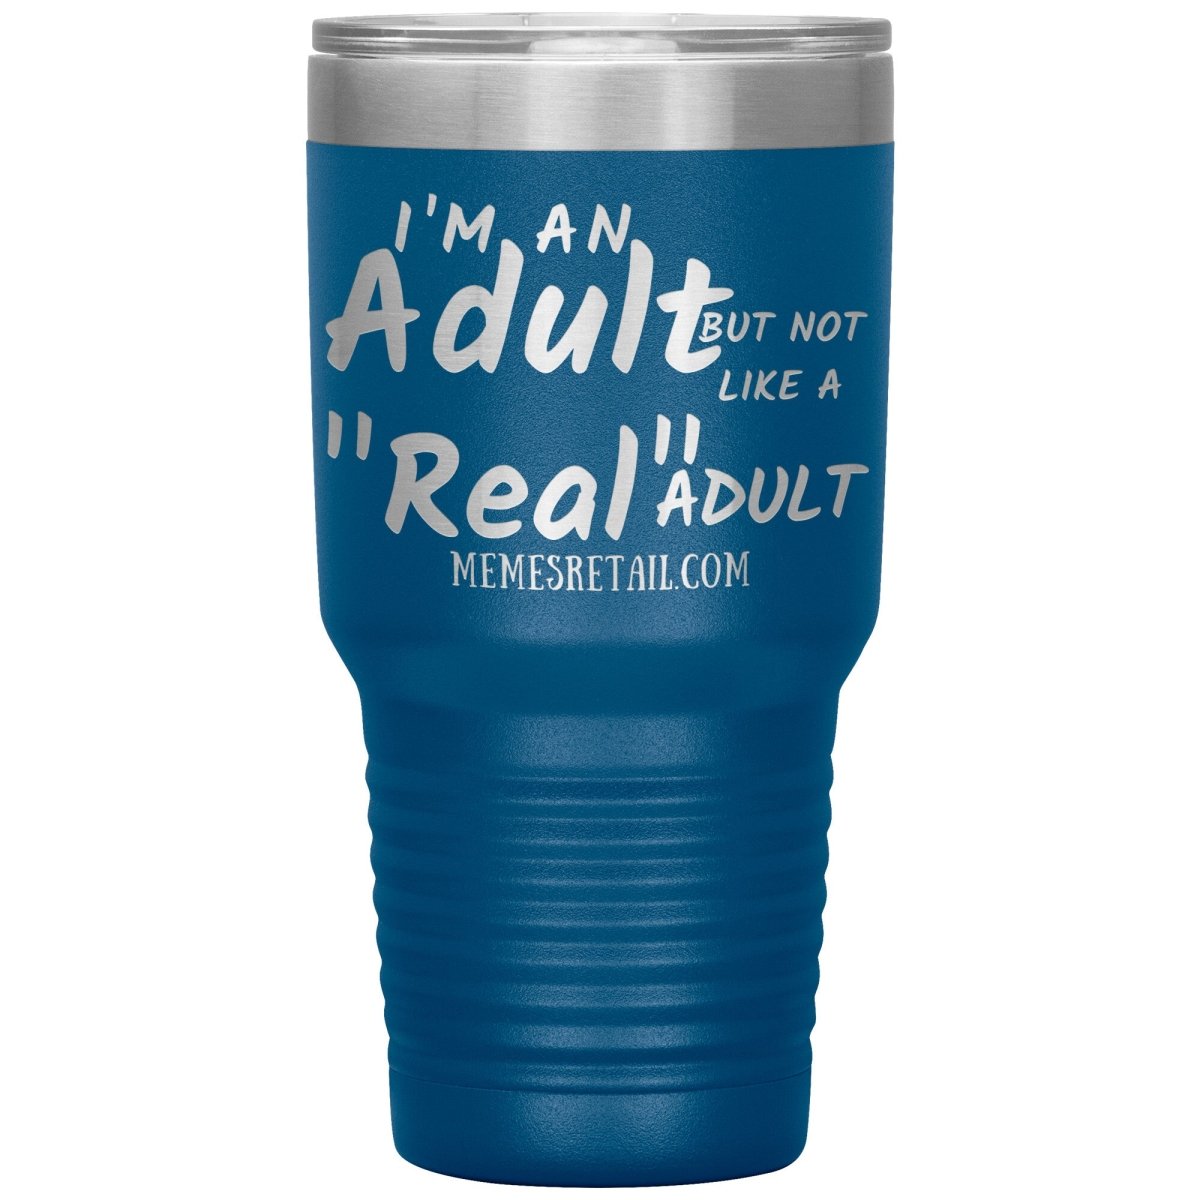 I'm an adult, but not like a "real" adult Tumblers, 30oz Insulated Tumbler / Blue - MemesRetail.com